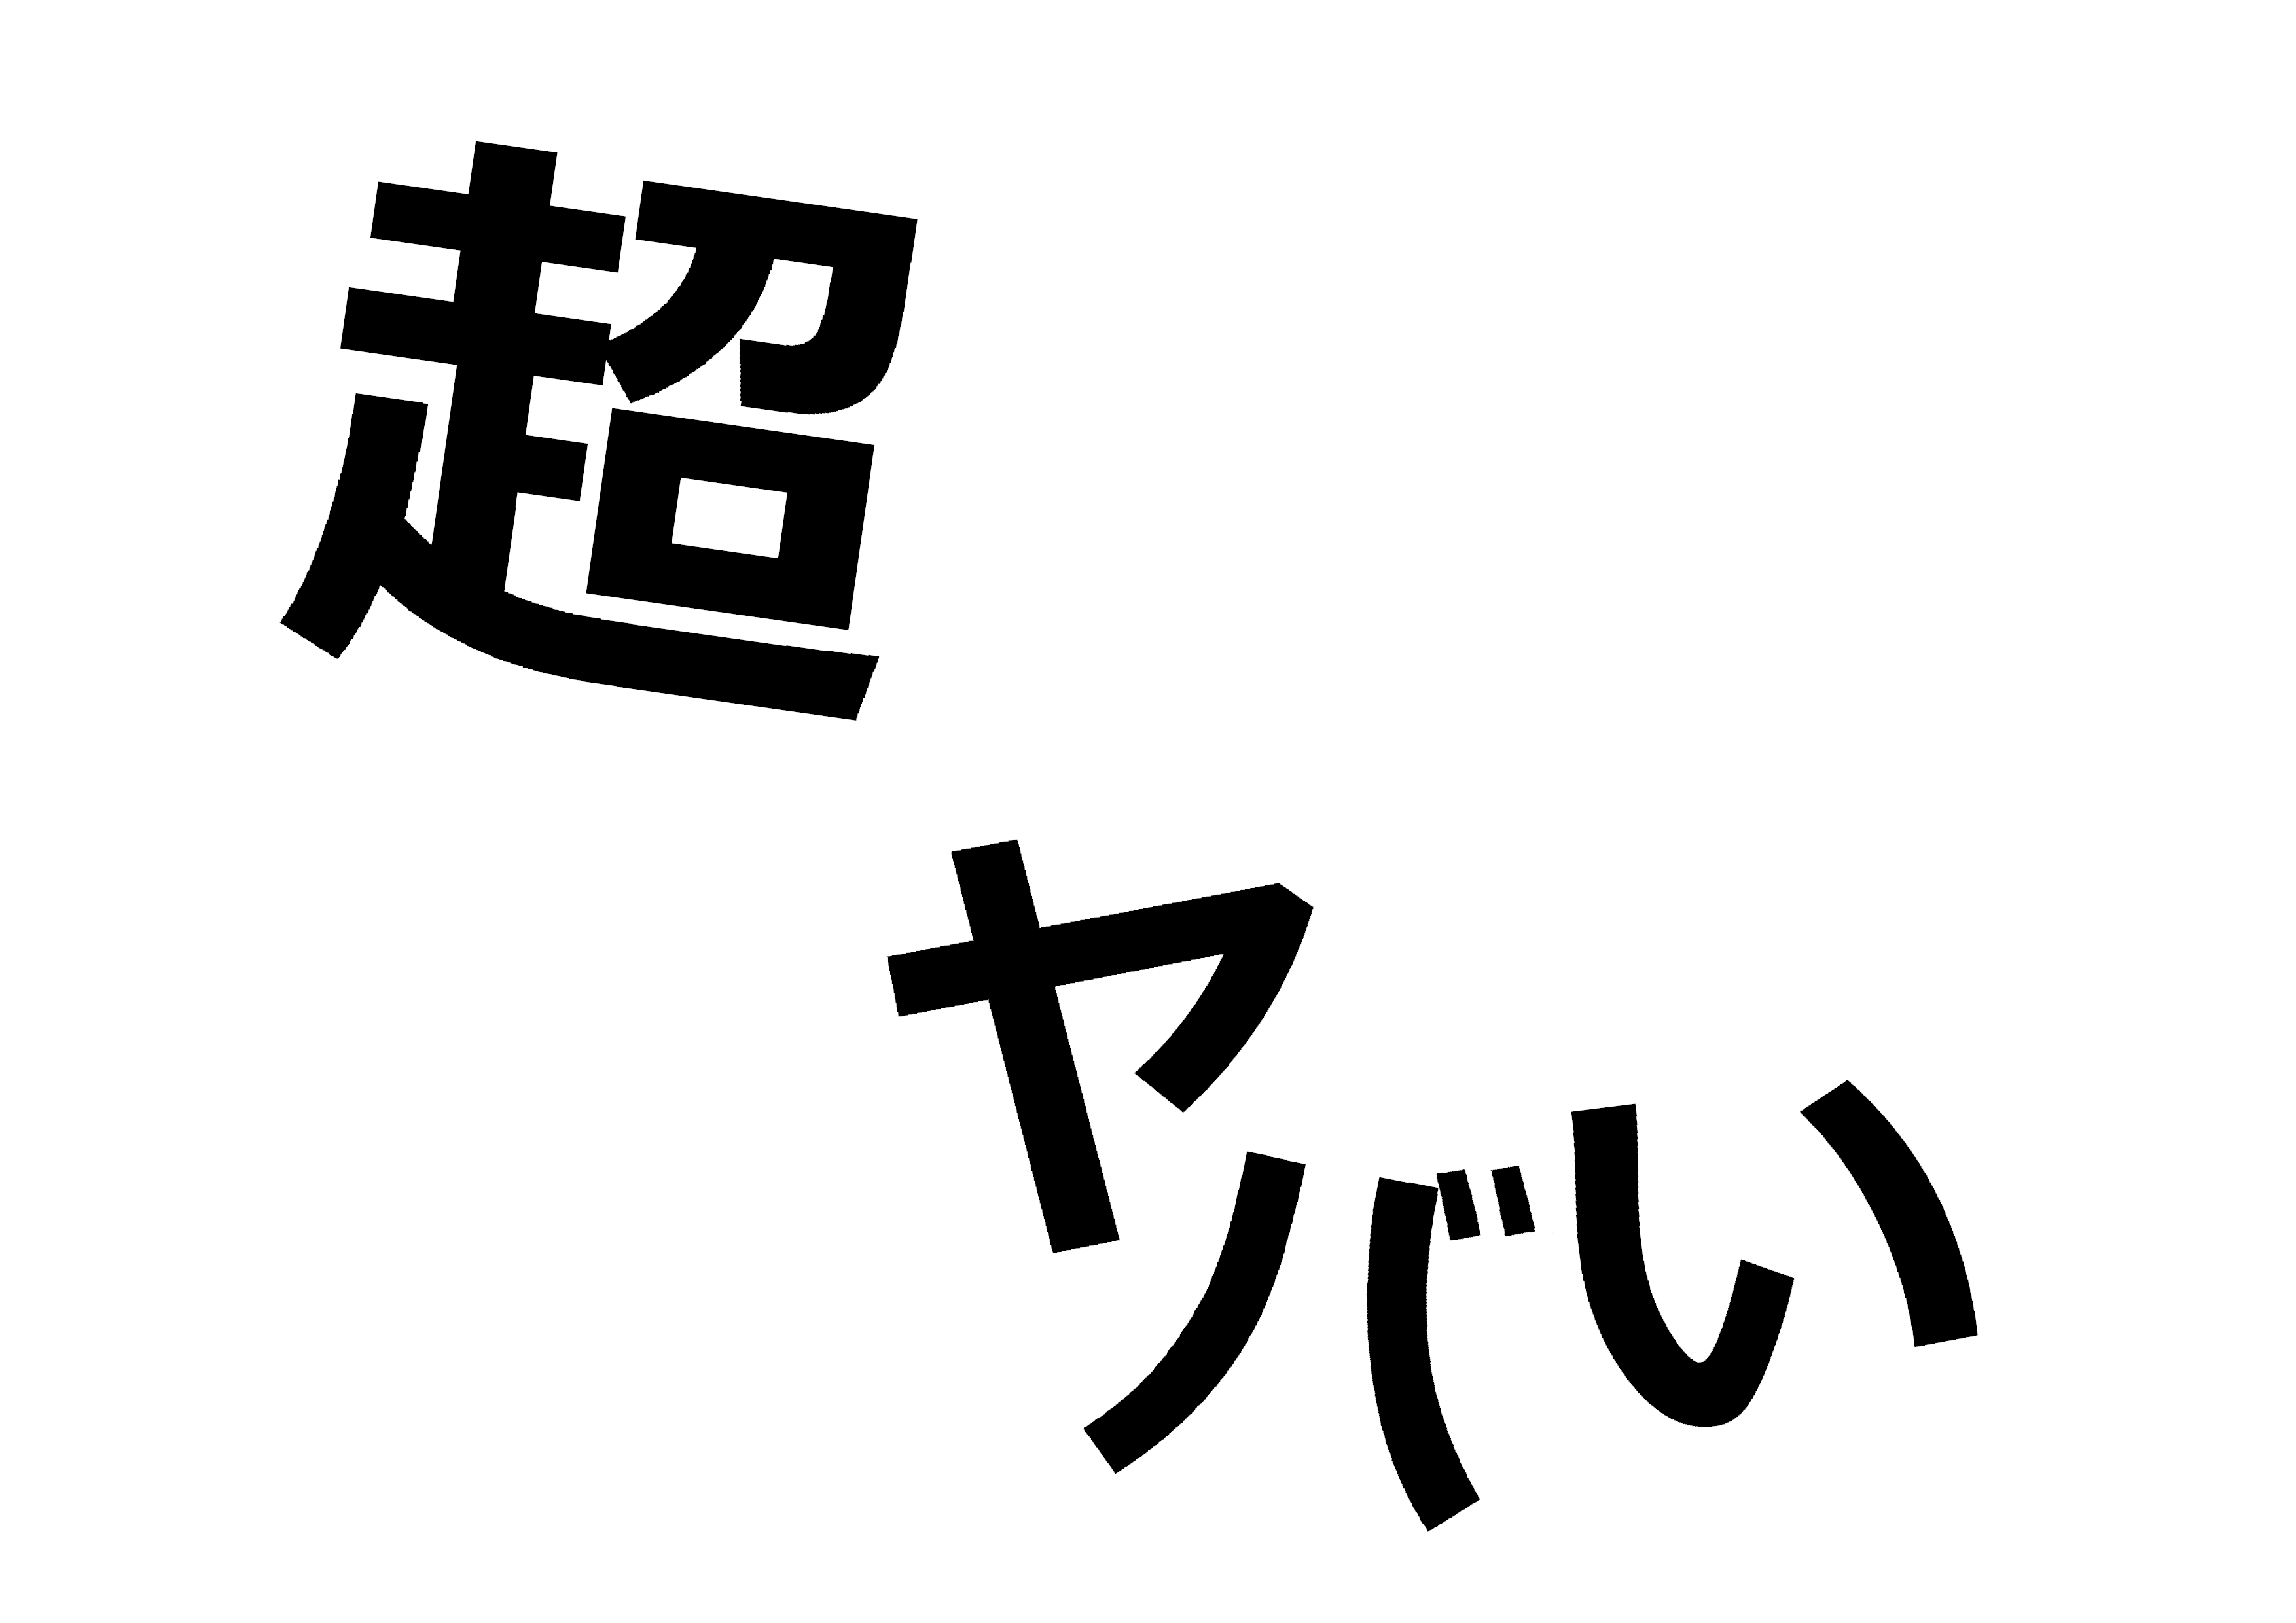 Japanese: What does Yabai (やばい) mean? Is the word popular